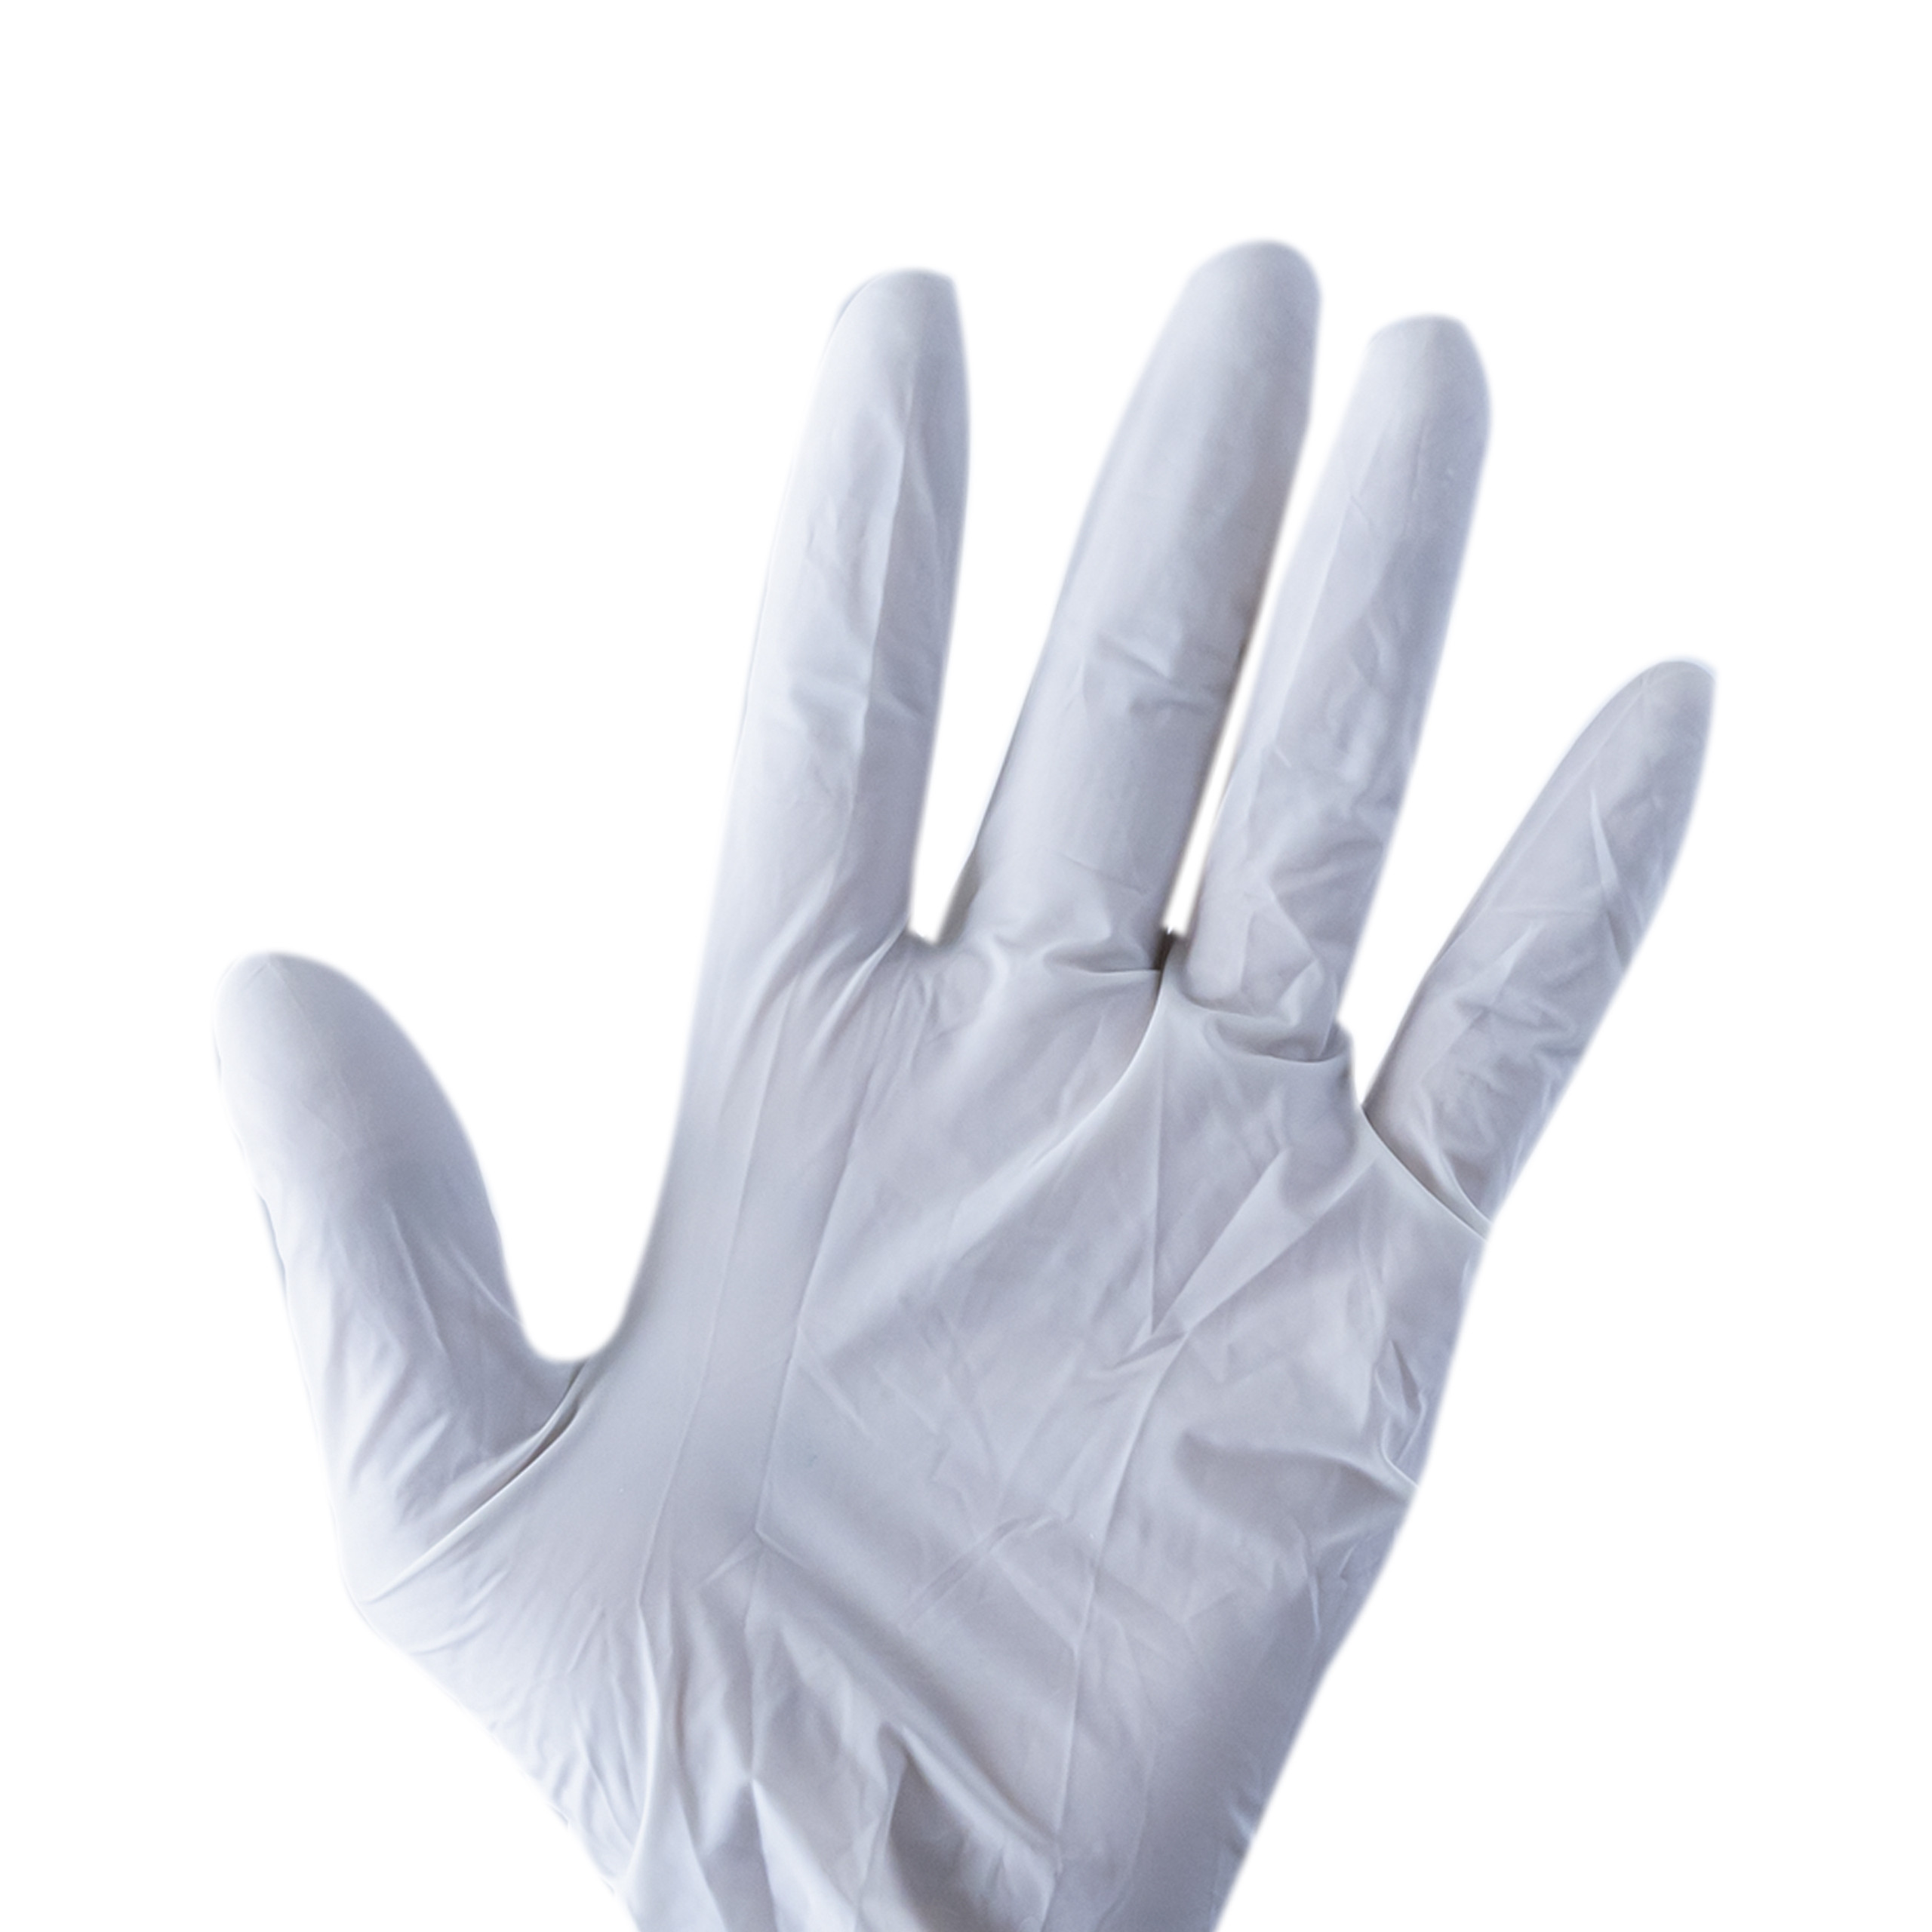 Zenplus Latex Gloves Extra Small